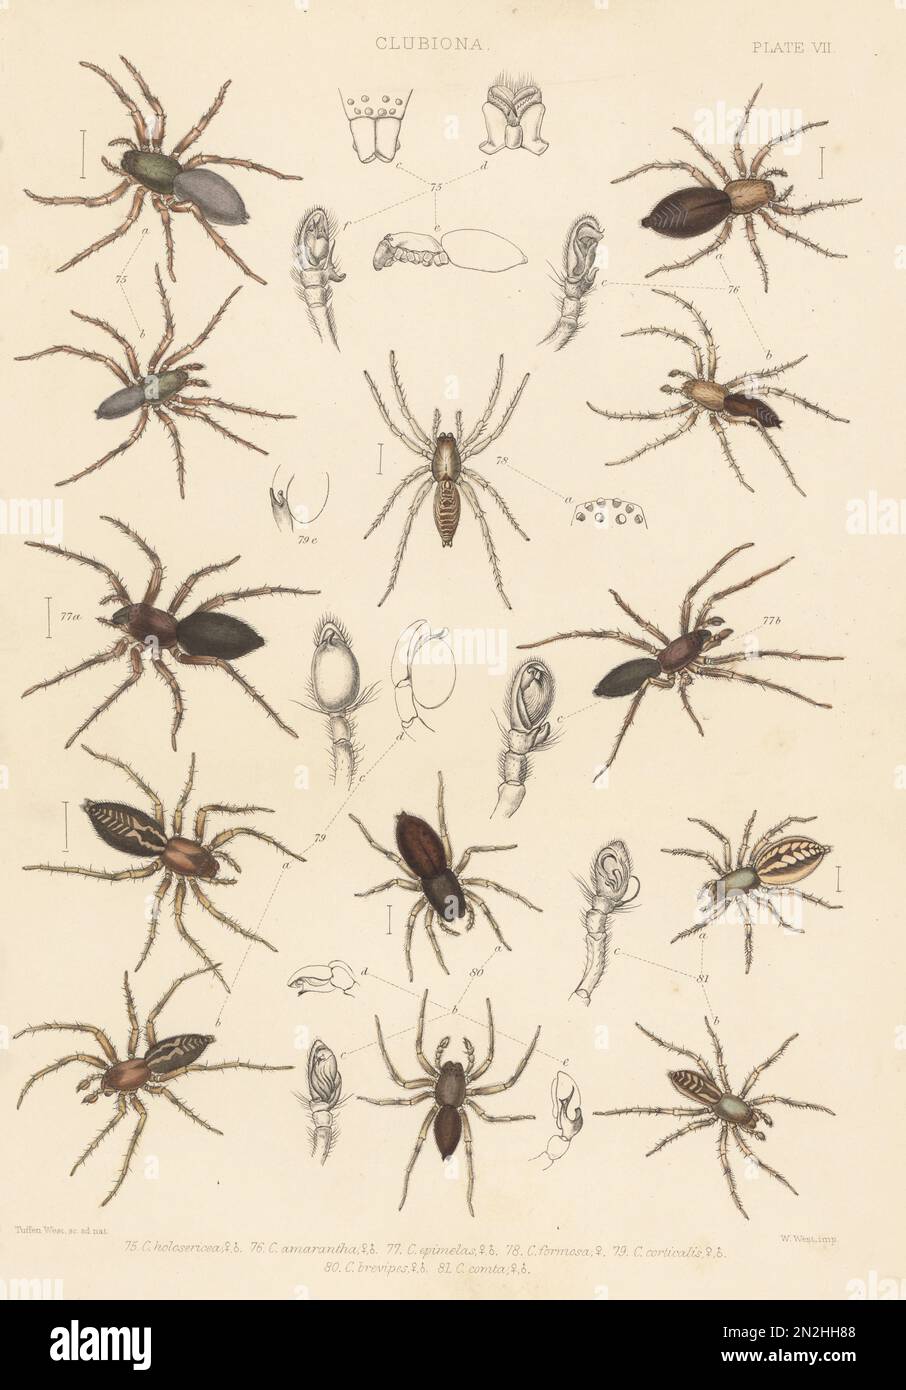 Sac spiders. Clubiona stagnatilis 75, Clubiona terrestris 76, Clubiona pallidula  77,78, bark sac spider, Clubiona corticalis 79, Clubiona brevipes 80, and Clubiona comta 81. Handcoloured lithograph by W. West after Tuffen West from John Blackwall’s A History of the Spiders of Great Britain and Ireland, Ray Society, London, 1861. Stock Photo